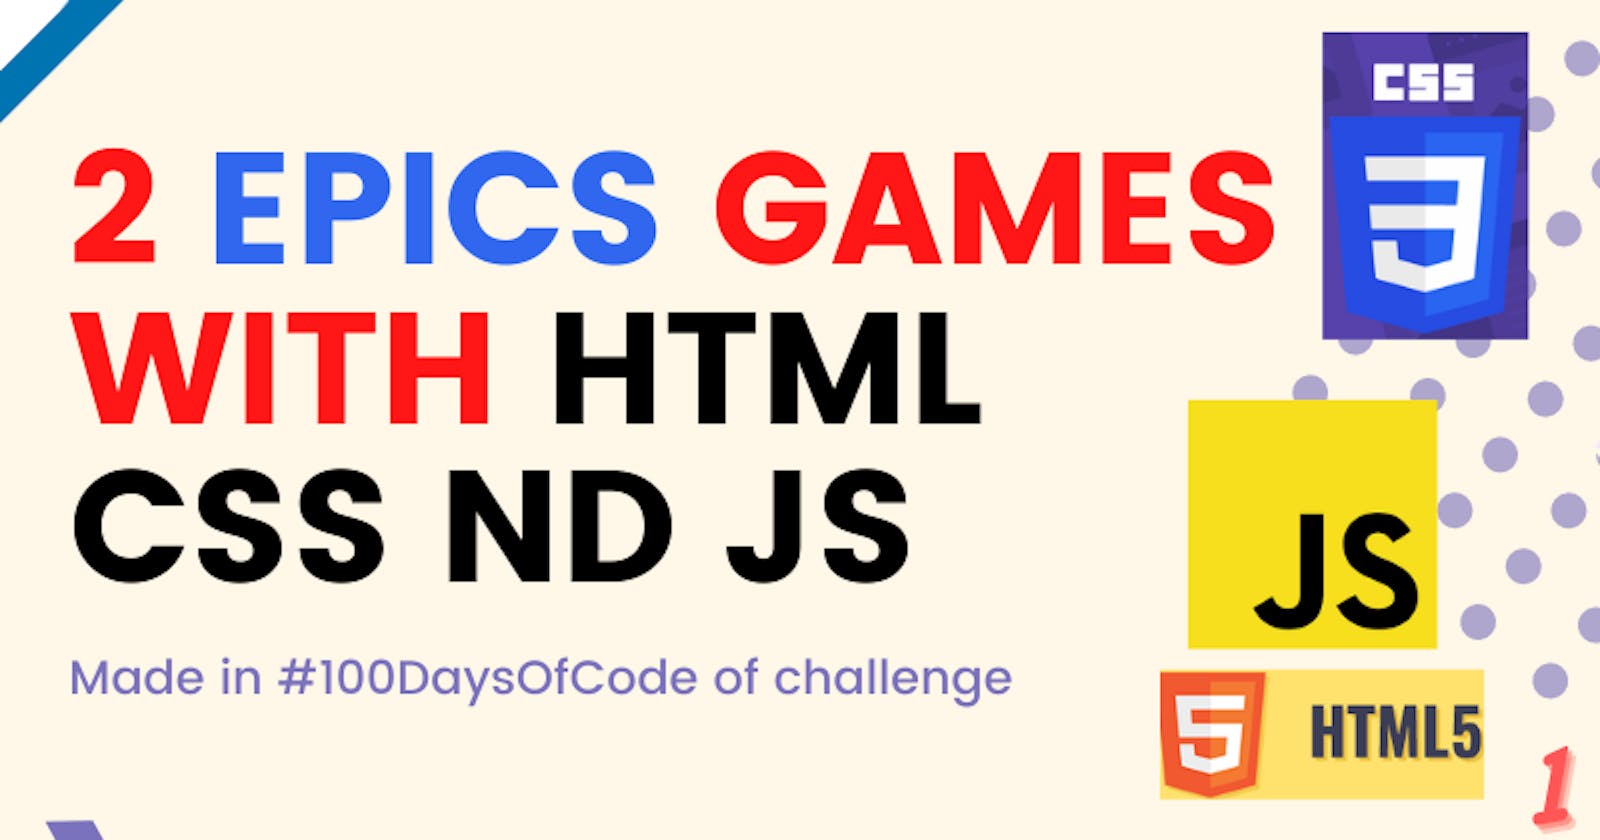 I made these 2 games in my #100DaysOfCode challenge